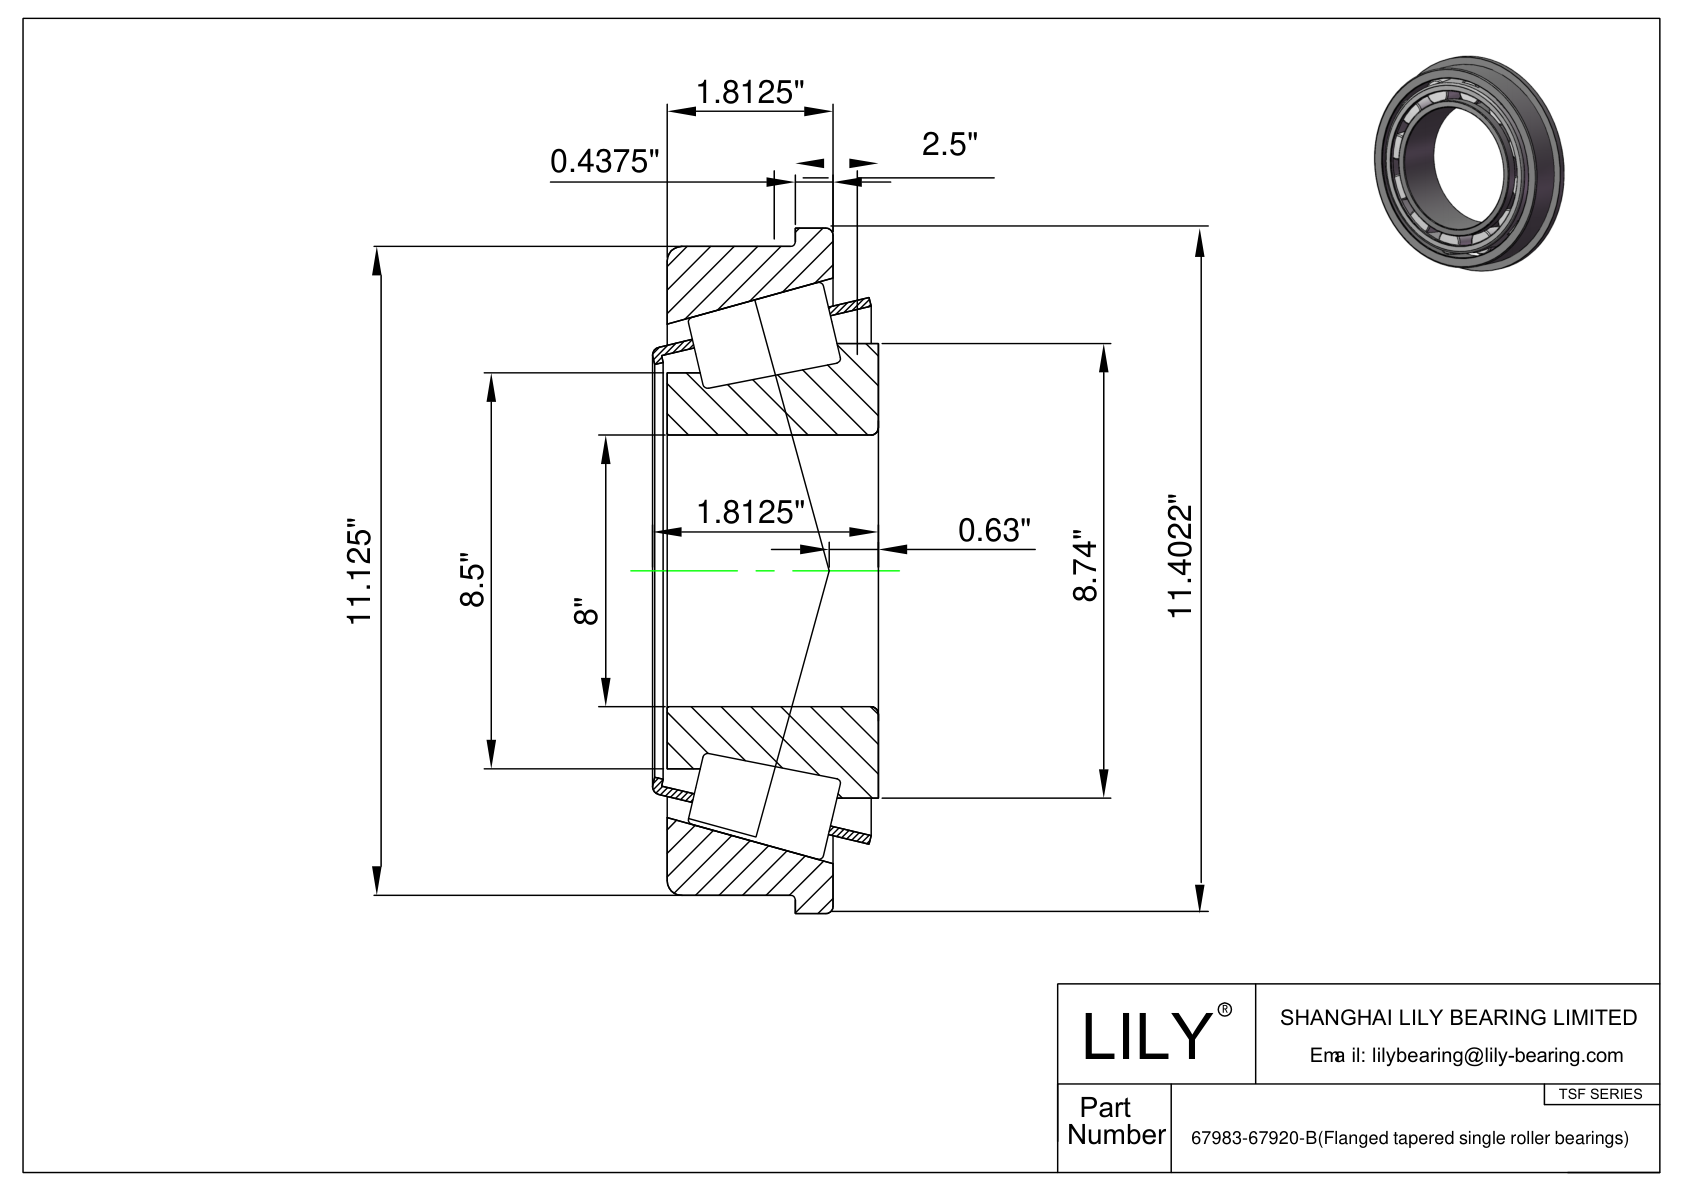 67983-67920-B TSF (Tapered Single Roller Bearings with Flange) (Imperial) cad drawing